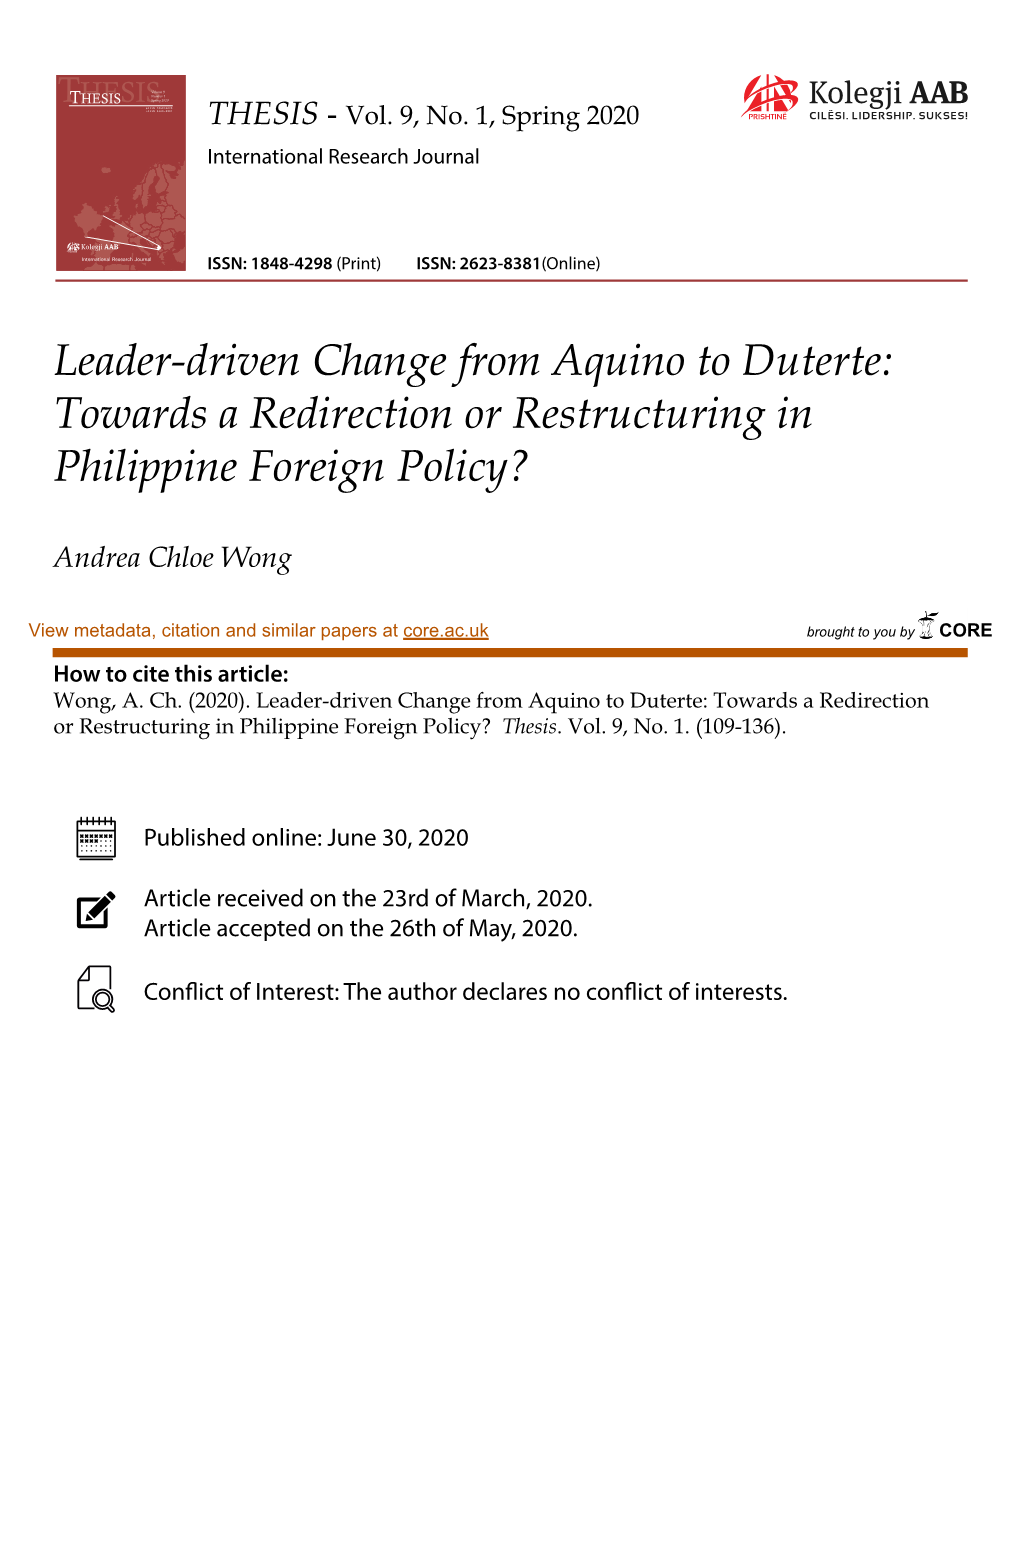 Leader-Driven Change from Aquino to Duterte: Towards a Redirection Or Restructuring in Philippine Foreign Policy?